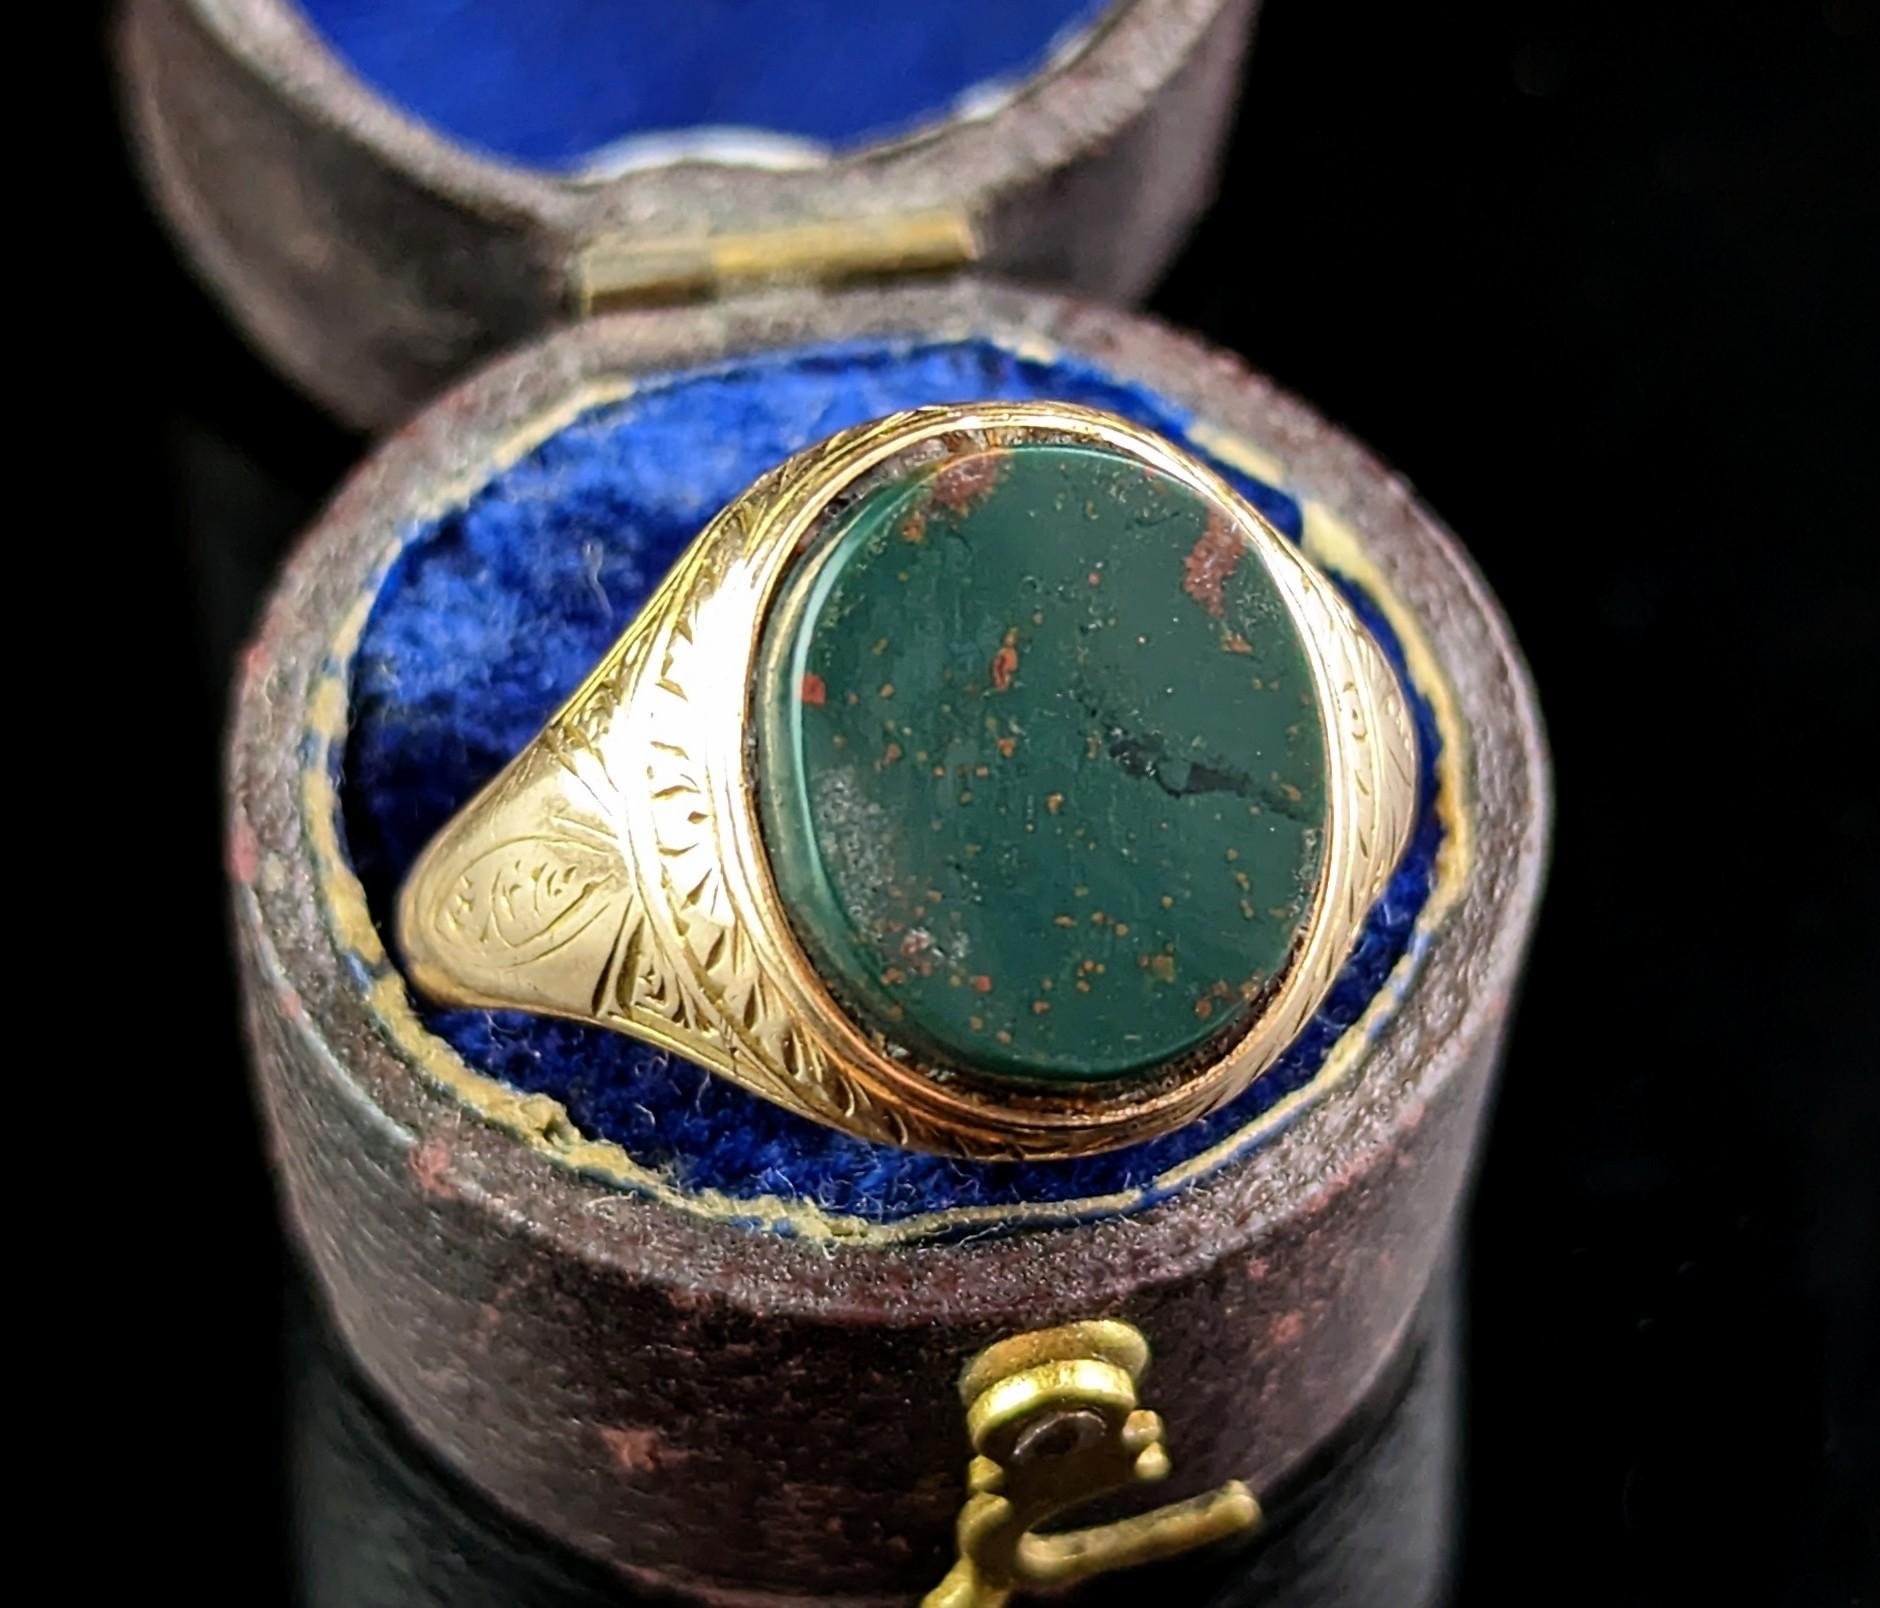 This handsome antique, Victorian era
15kt gold and Bloodstone signet really stands out from the crowd.

It is a delicate yet bold ring, perfect as a pinky ring, the fine engraved shoulders contrasting beautifully with the big bloodstone seal.

The